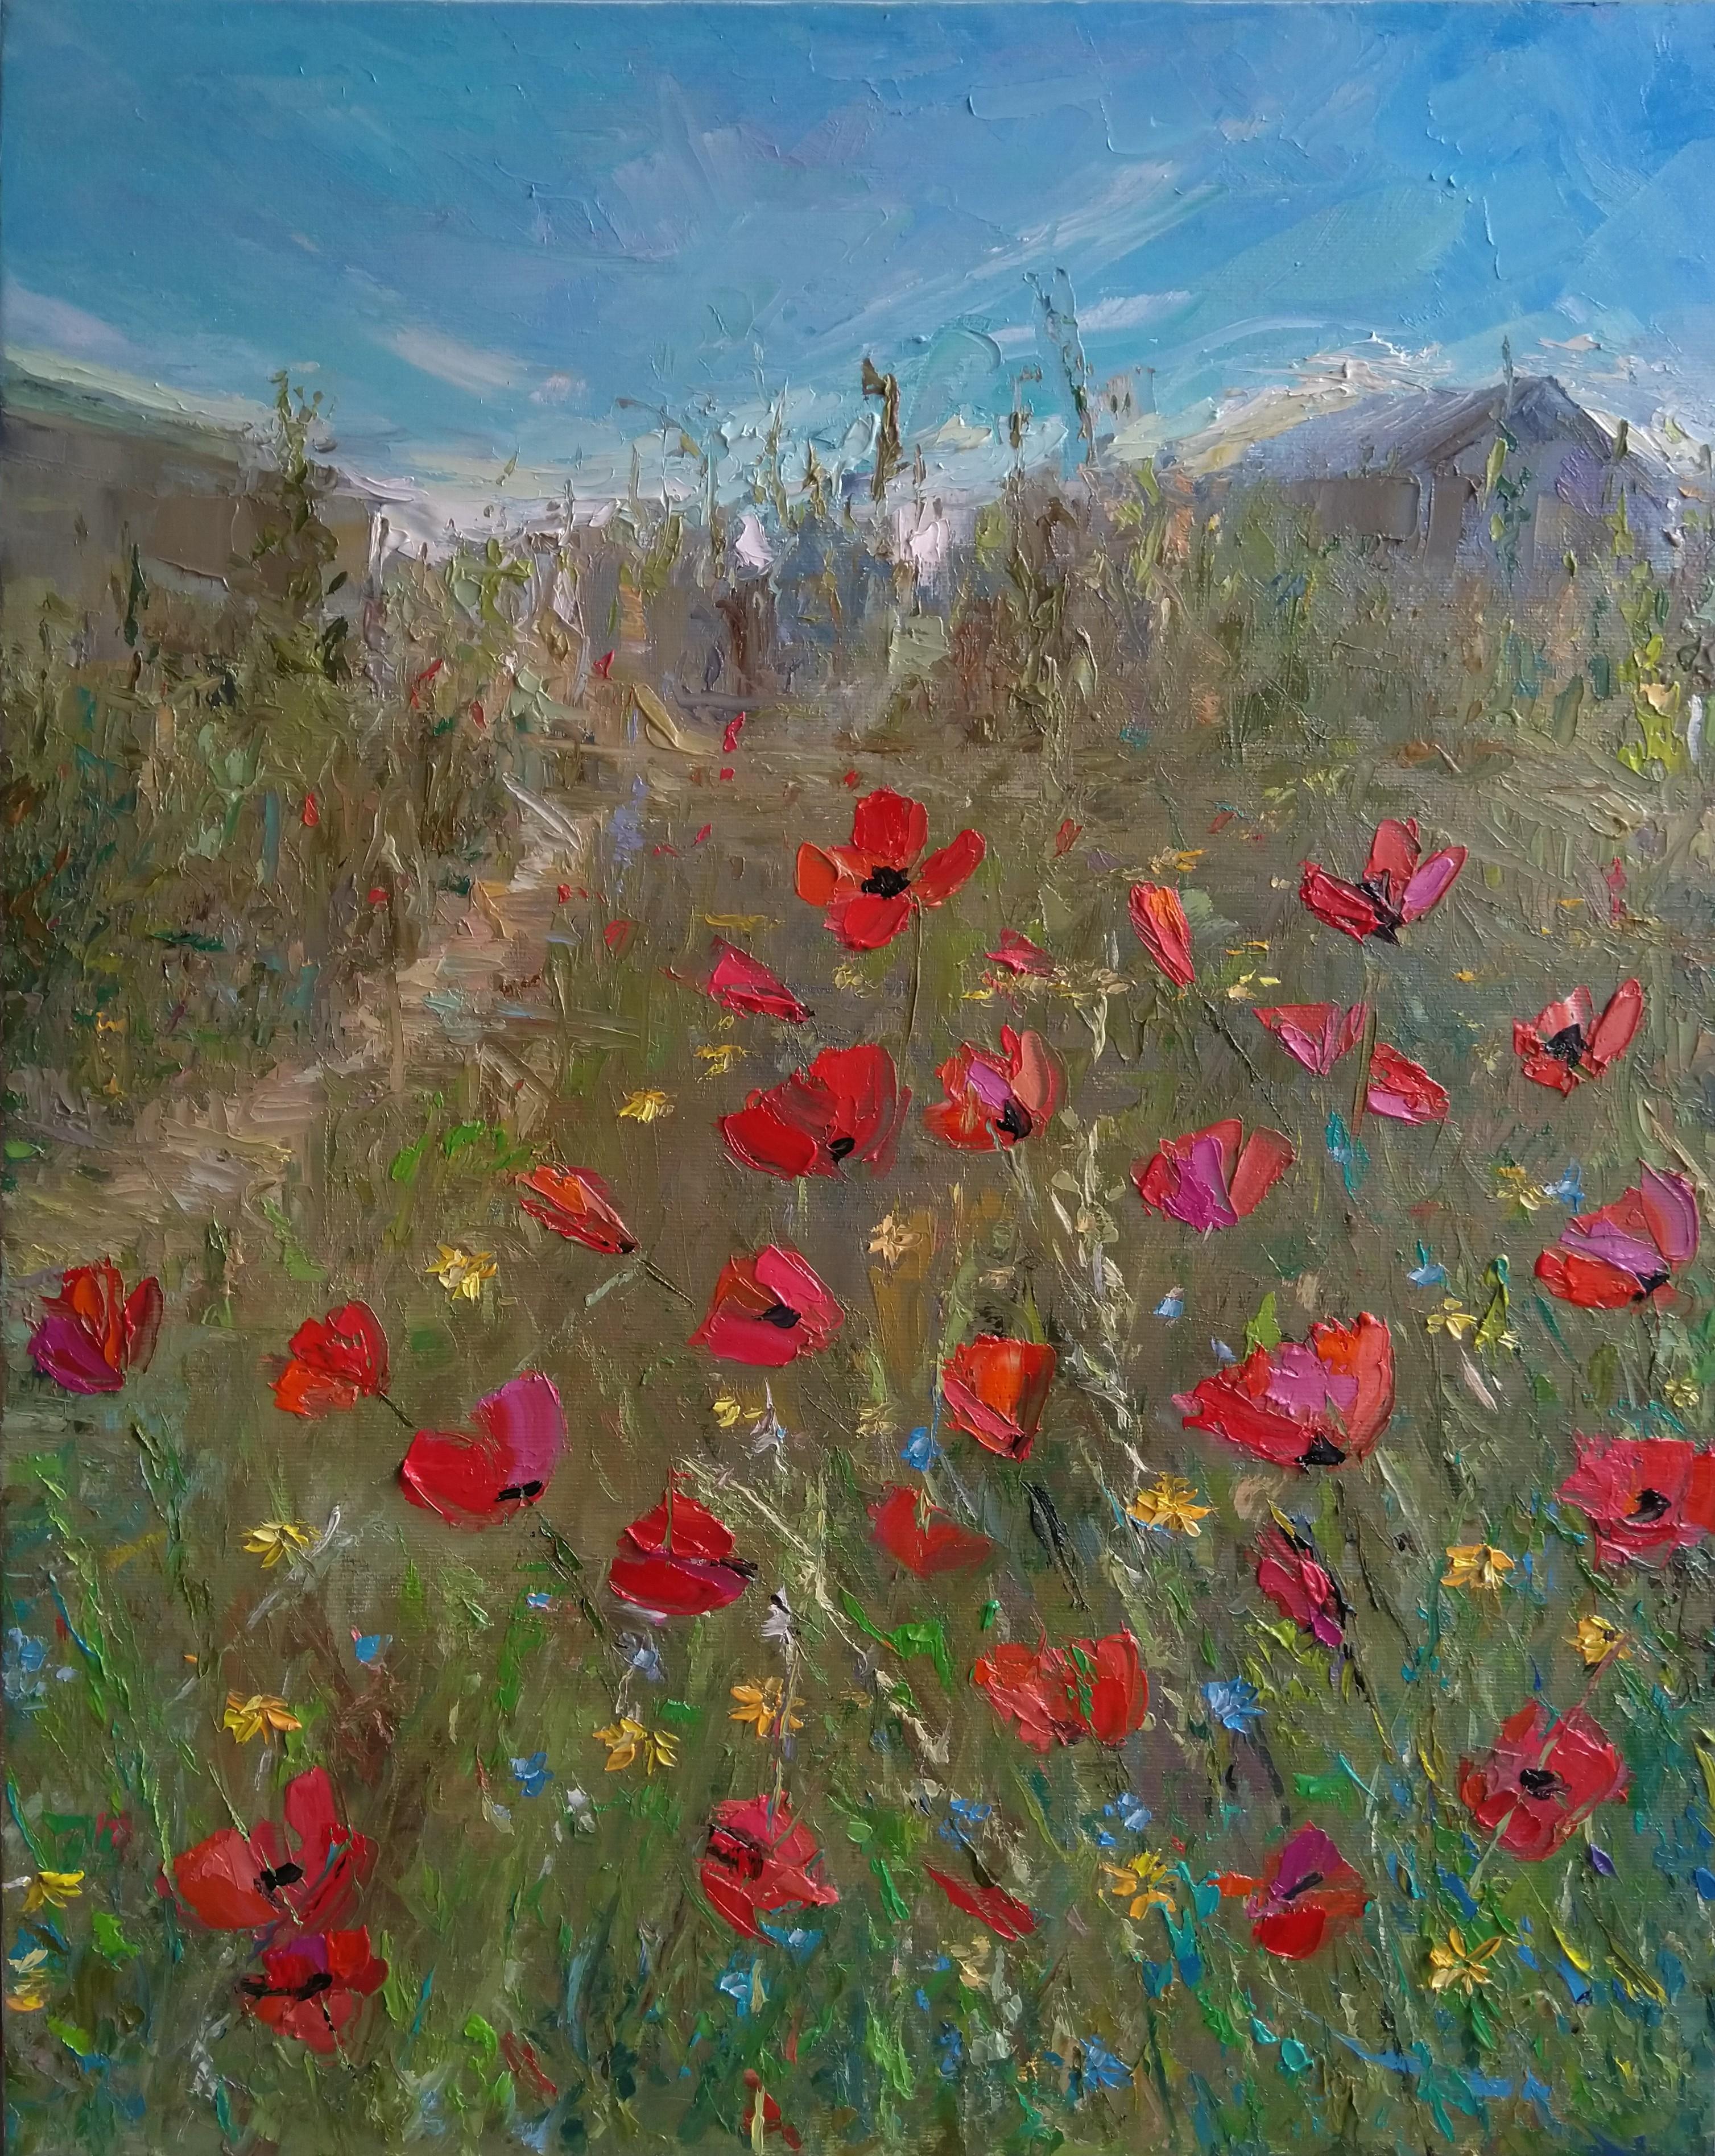 Armenian Contemporary Art by Kamsar Ohanyan - In the Spring Field